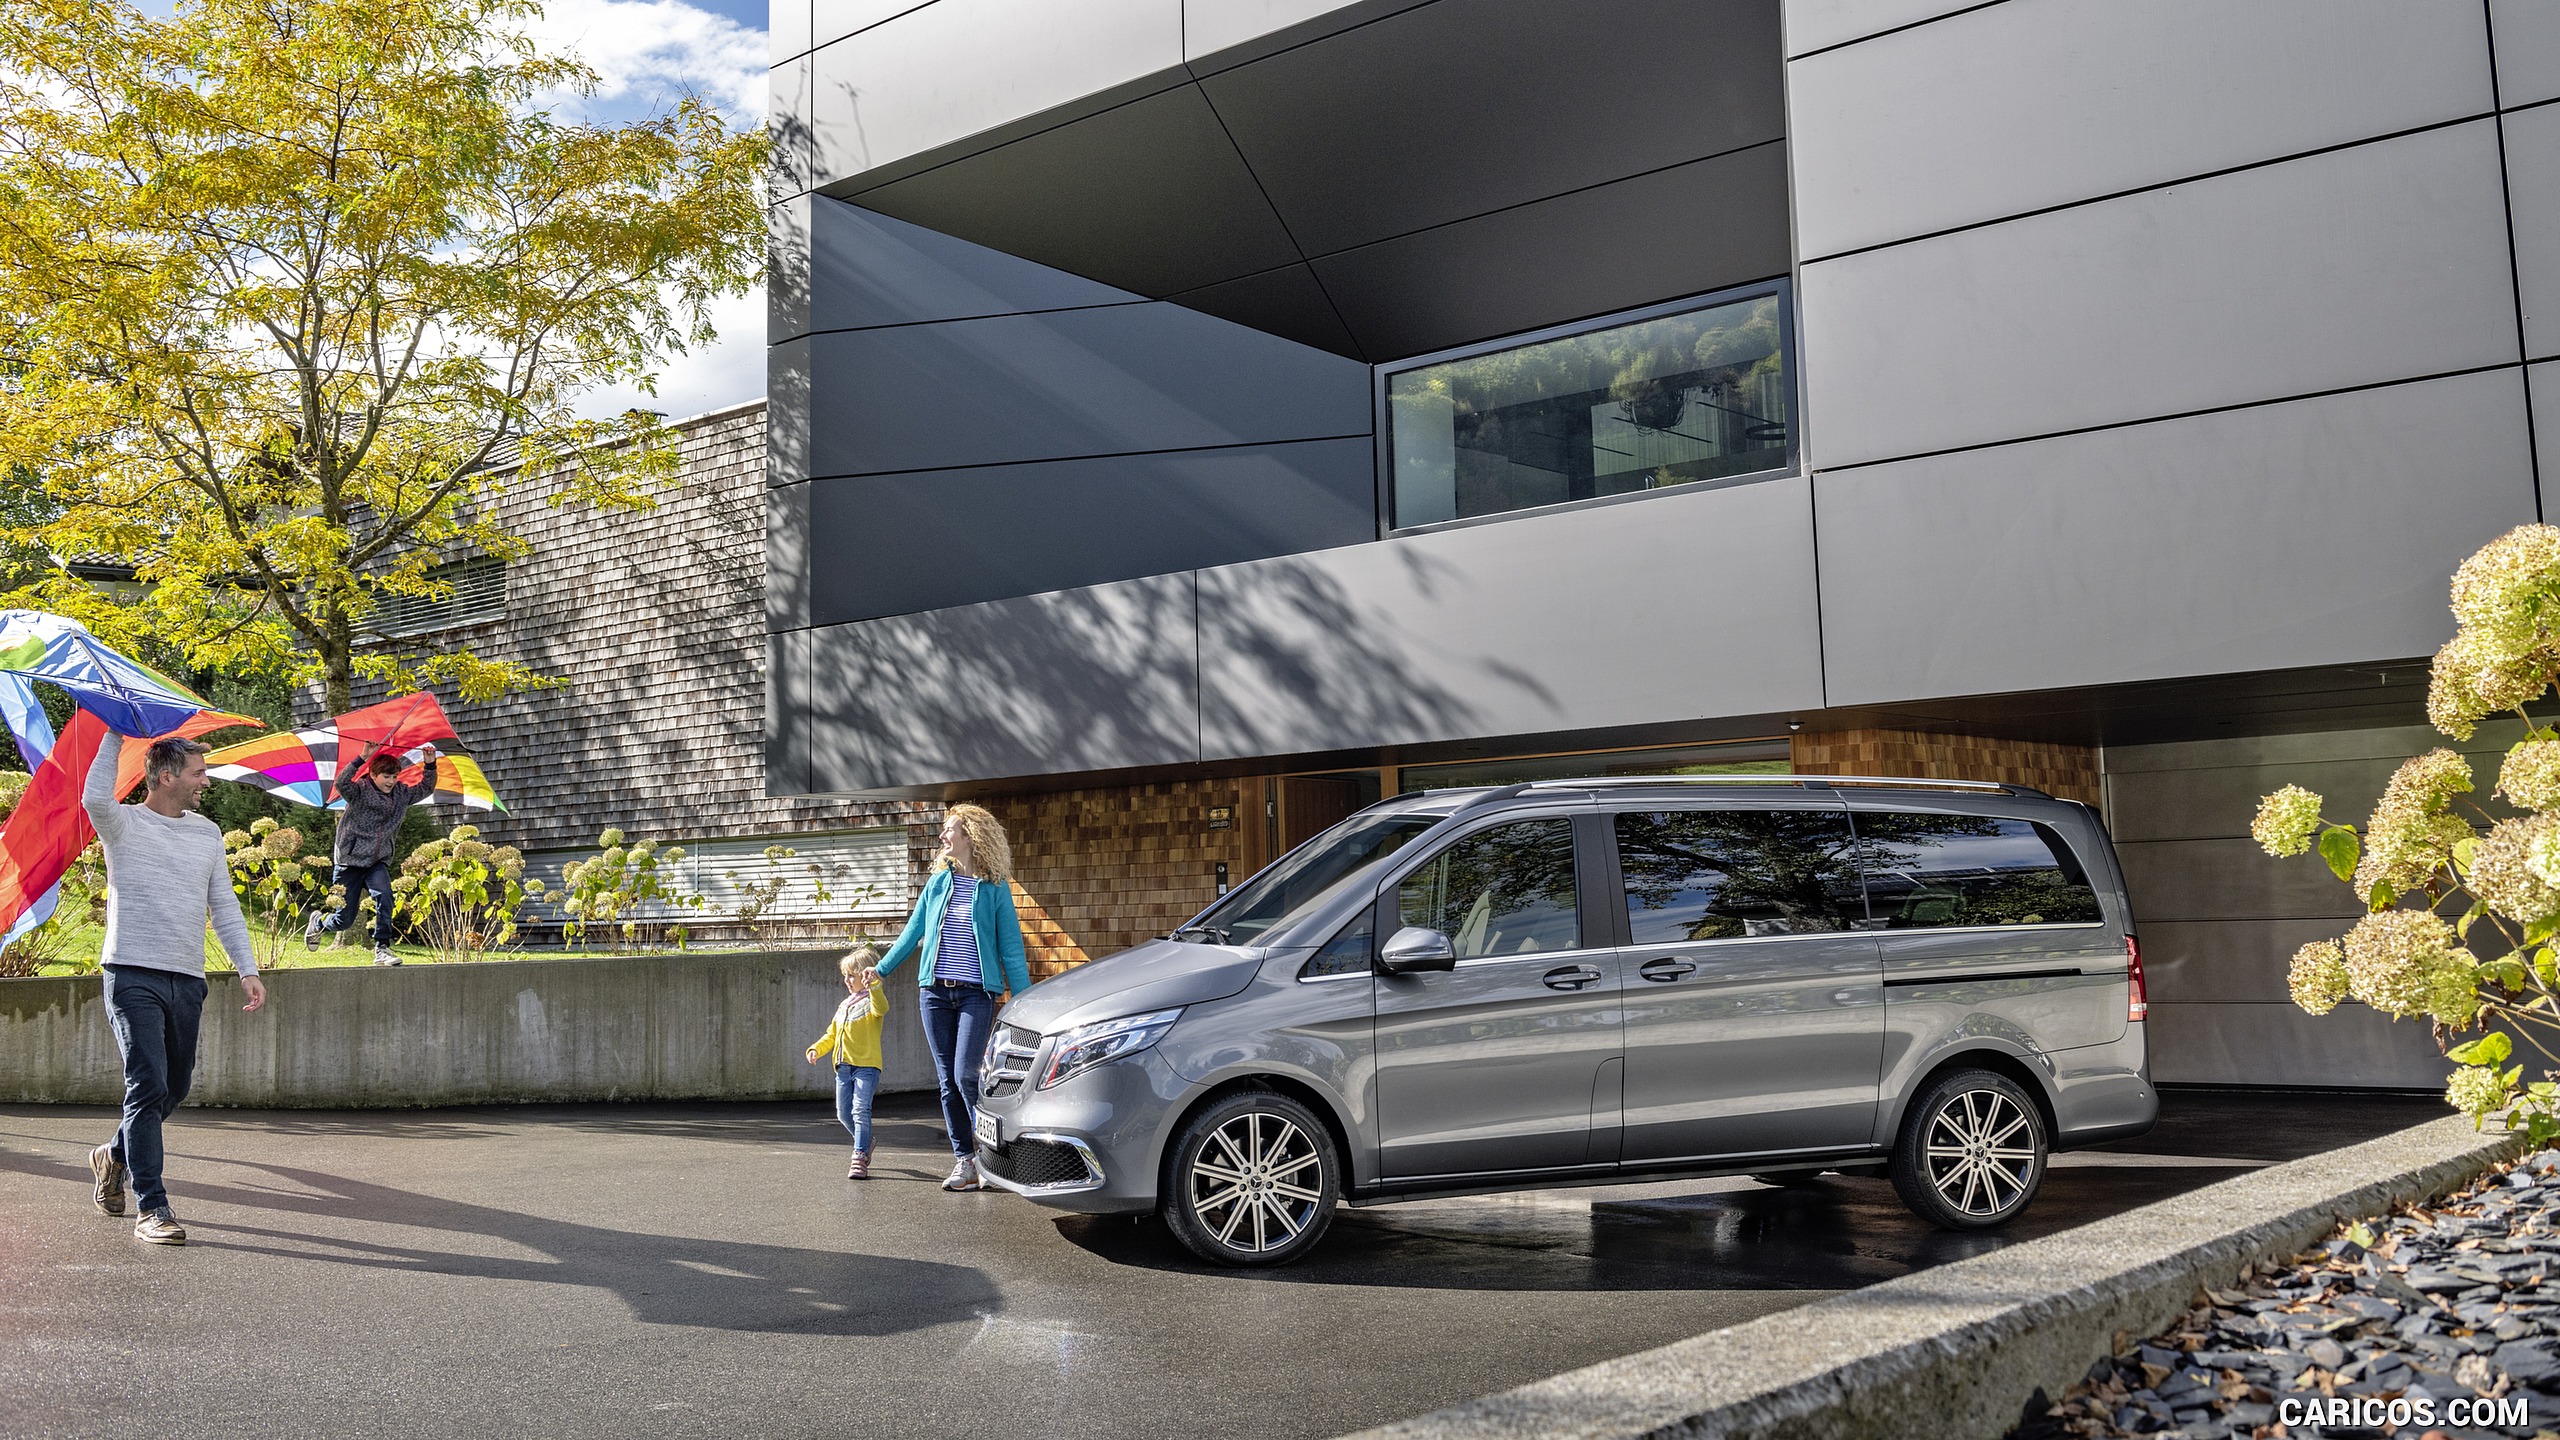 2019 Mercedes-Benz V-Class EXCLUSIVE Line (Color: Selenit Grey Metallic) - Side, #15 of 216